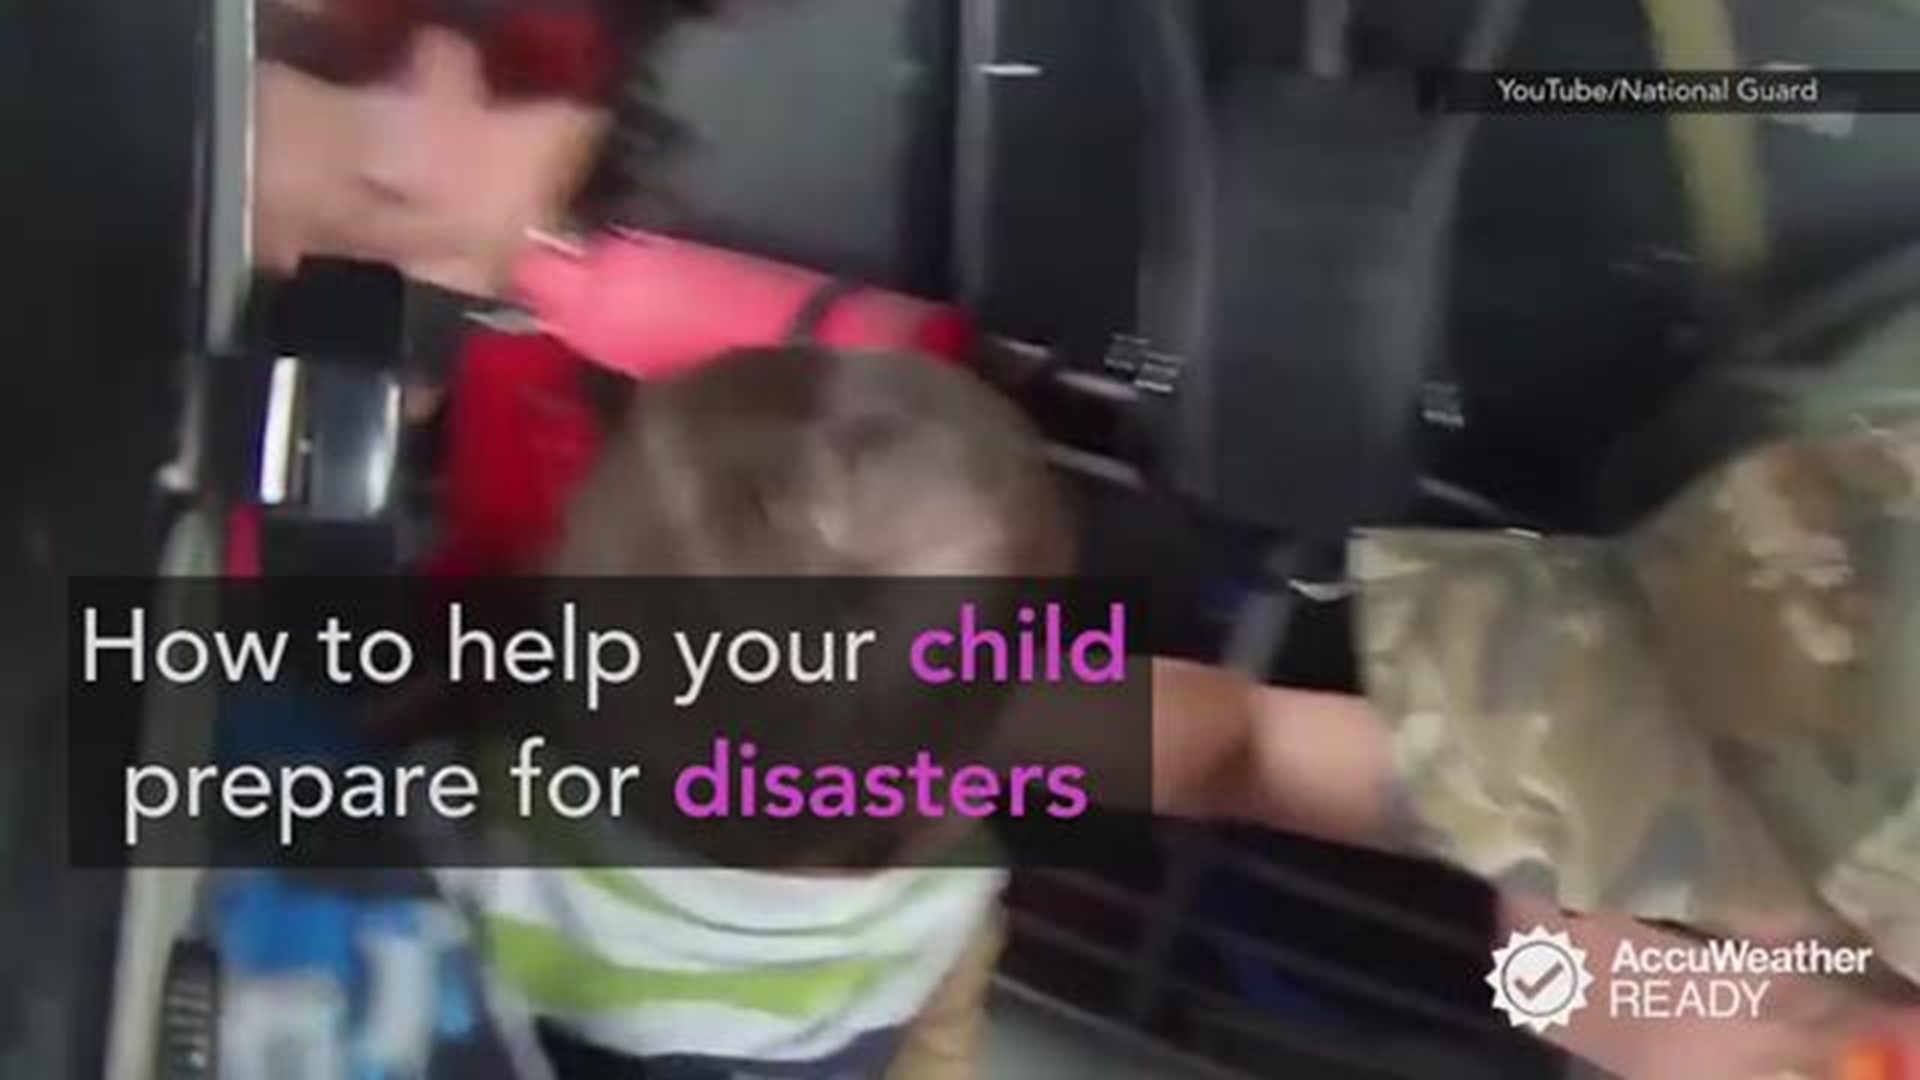 Save the Children's Director of U.S. Emergencies, Sarah Thompson, shares tips for parents and guardians on how to help children get ready before a disaster occurs.  